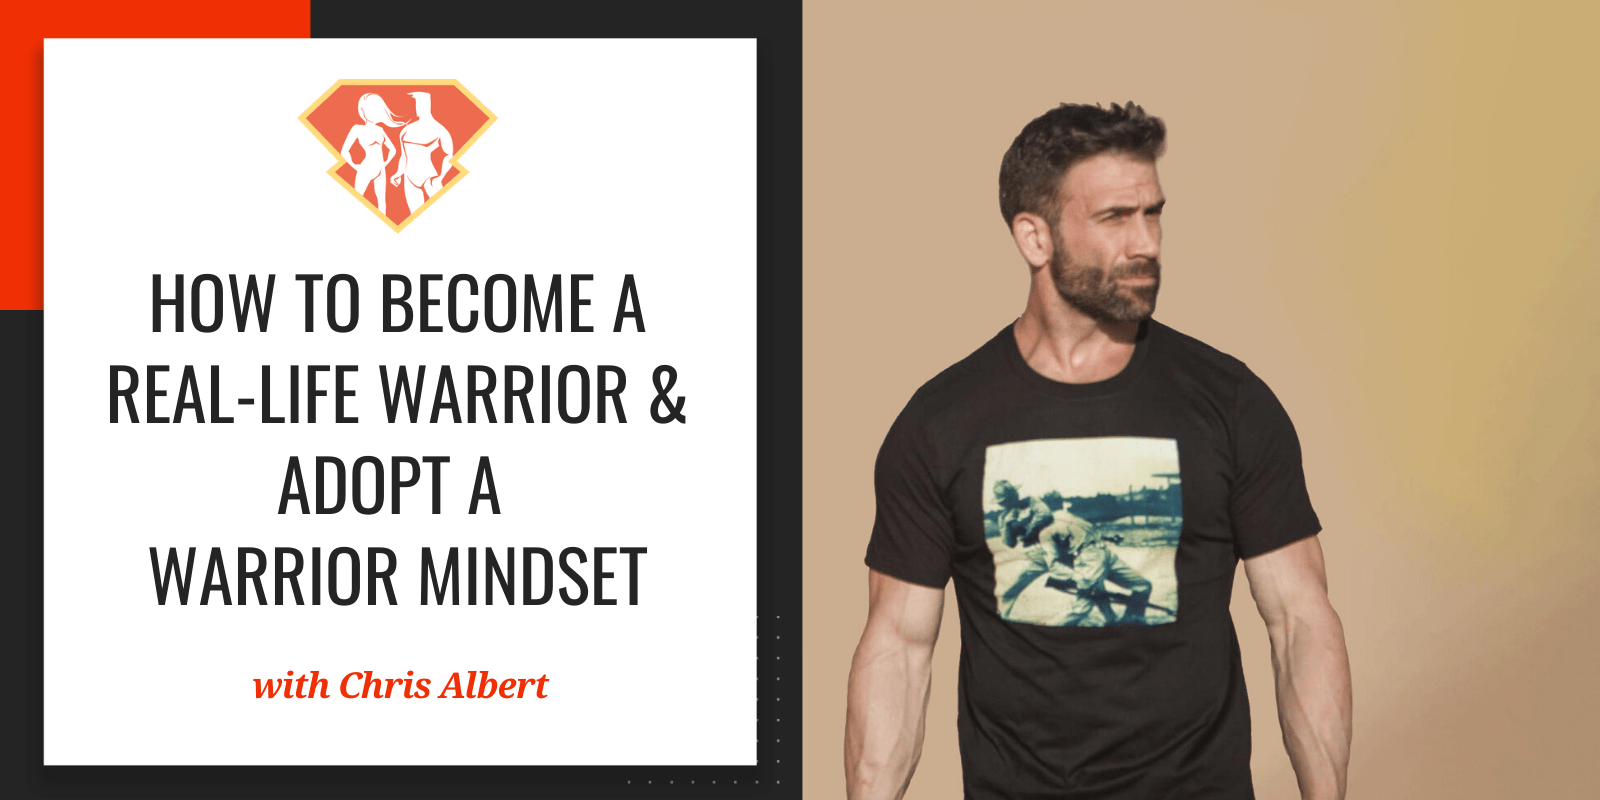 In this episode with Chris Albert, we talk about Chris' amazing story, as well as how we can adopt a warrior mindset and become real-life warriors.